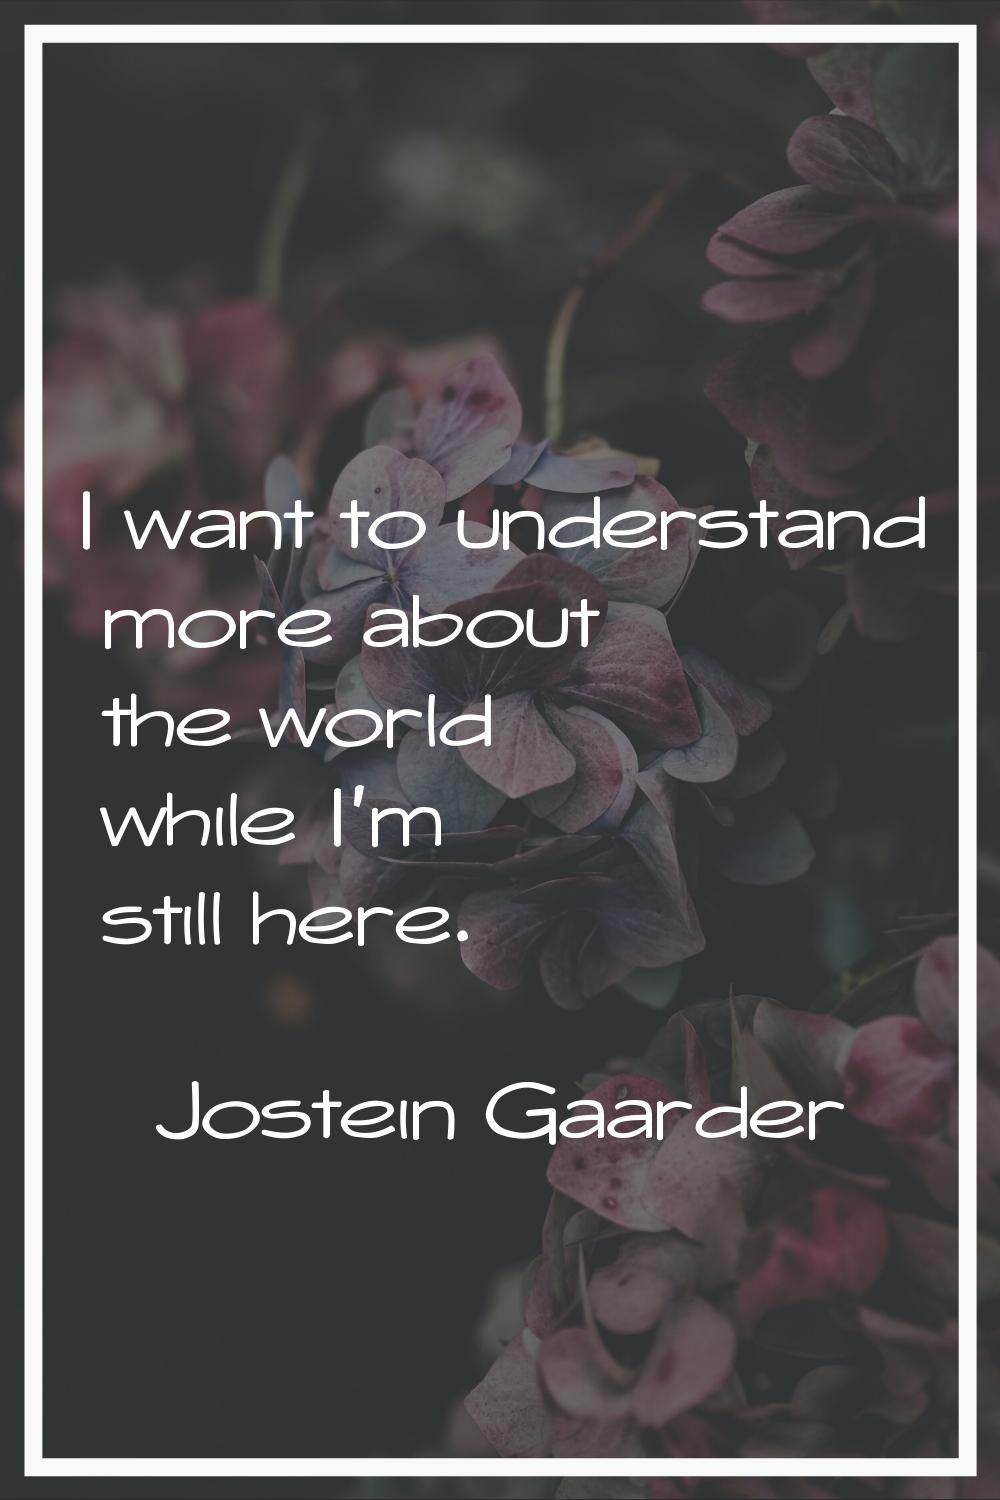 I want to understand more about the world while I'm still here.